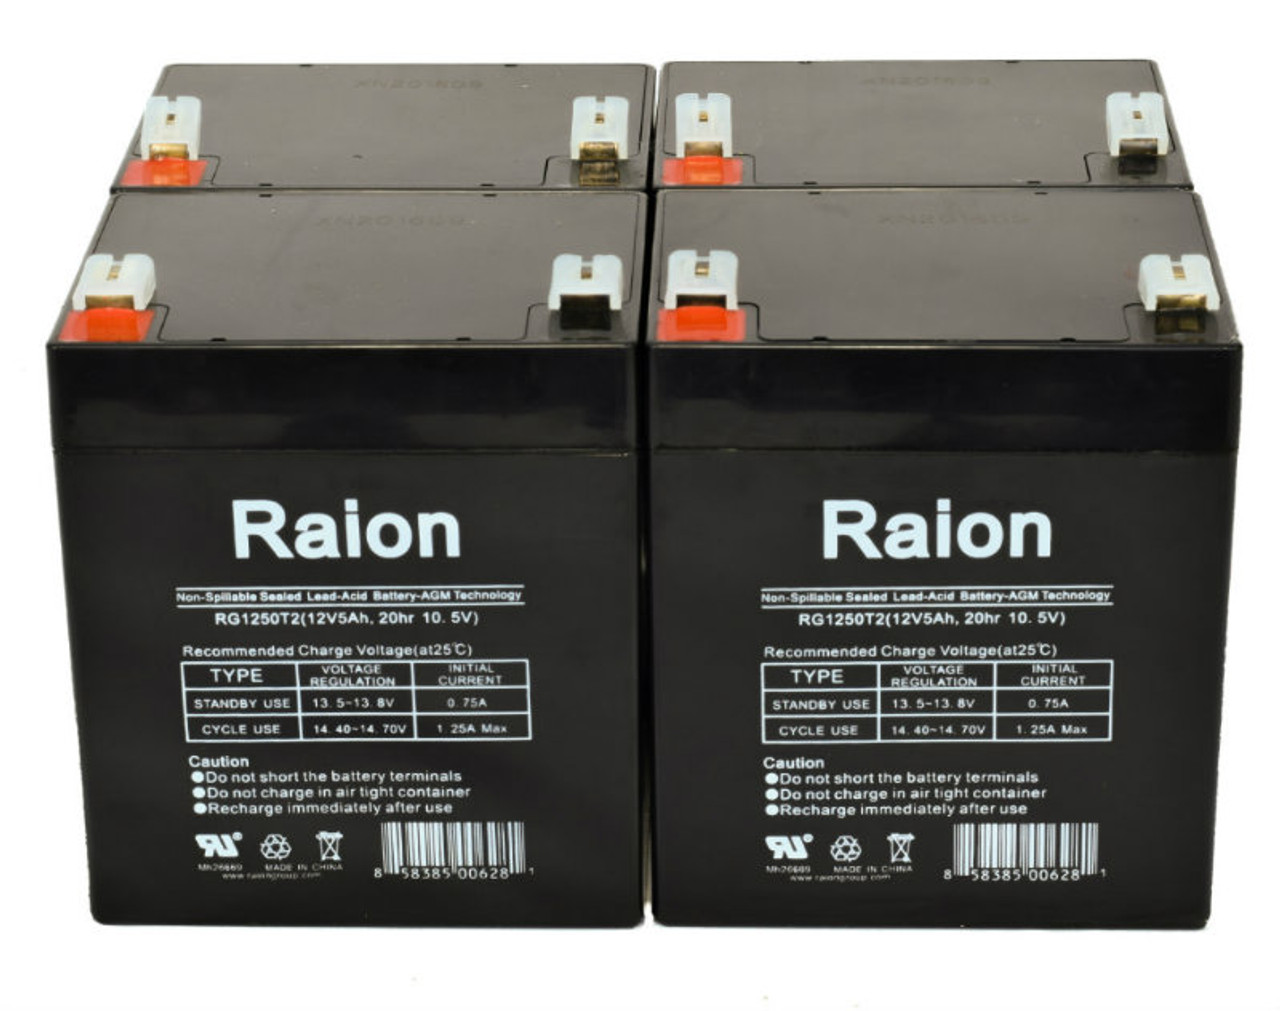 Raion Power 12V 5Ah RG1250T2 Replacement Lead Acid Battery for CBB NP4-12 - 4 Pack